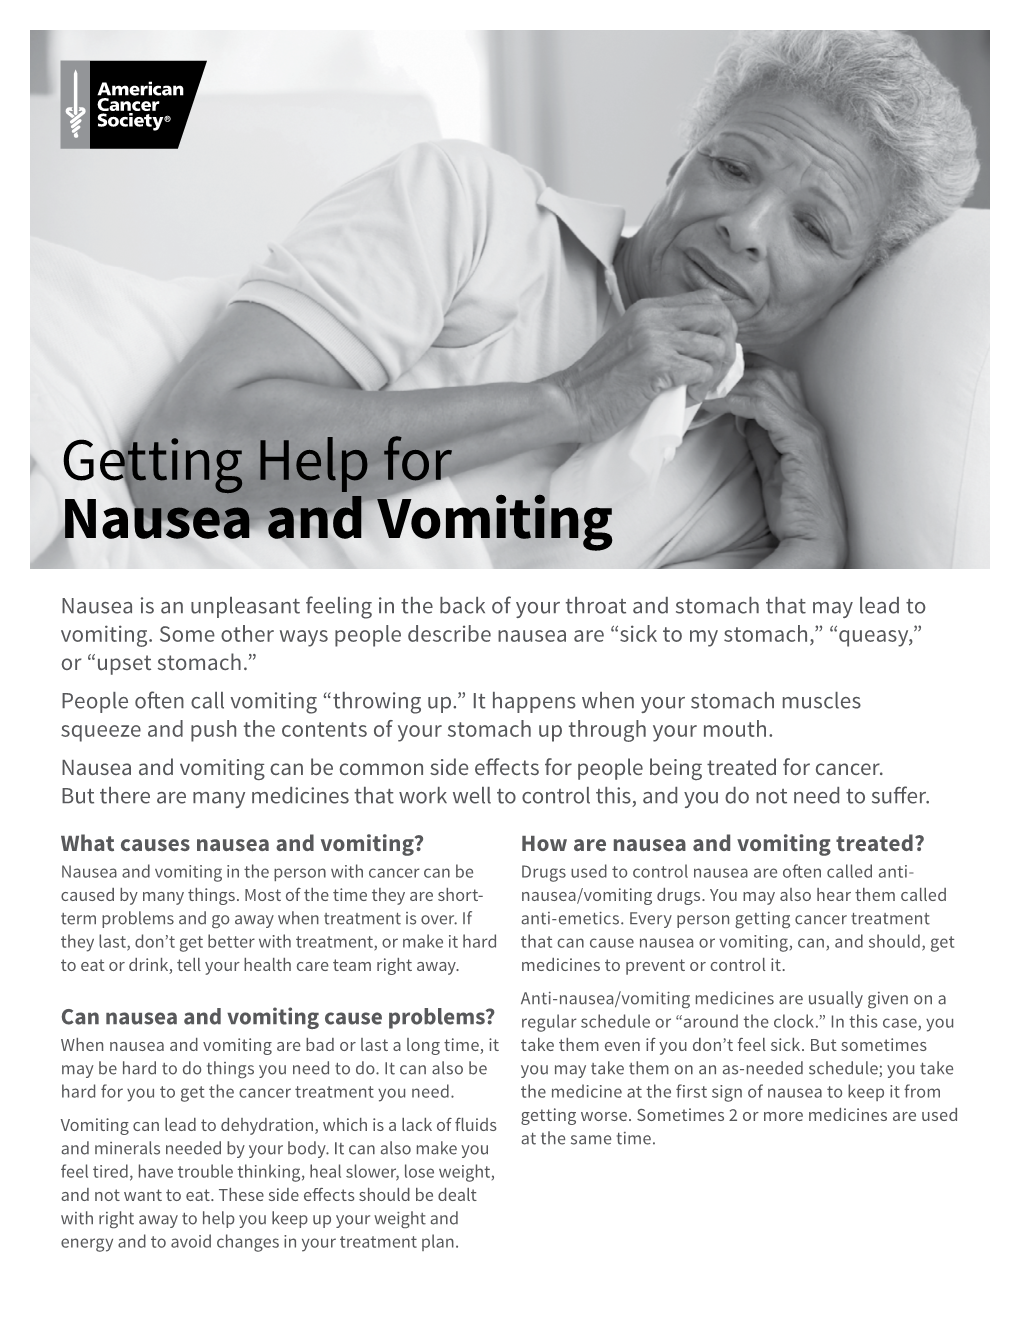 Getting Help for Nausea and Vomiting